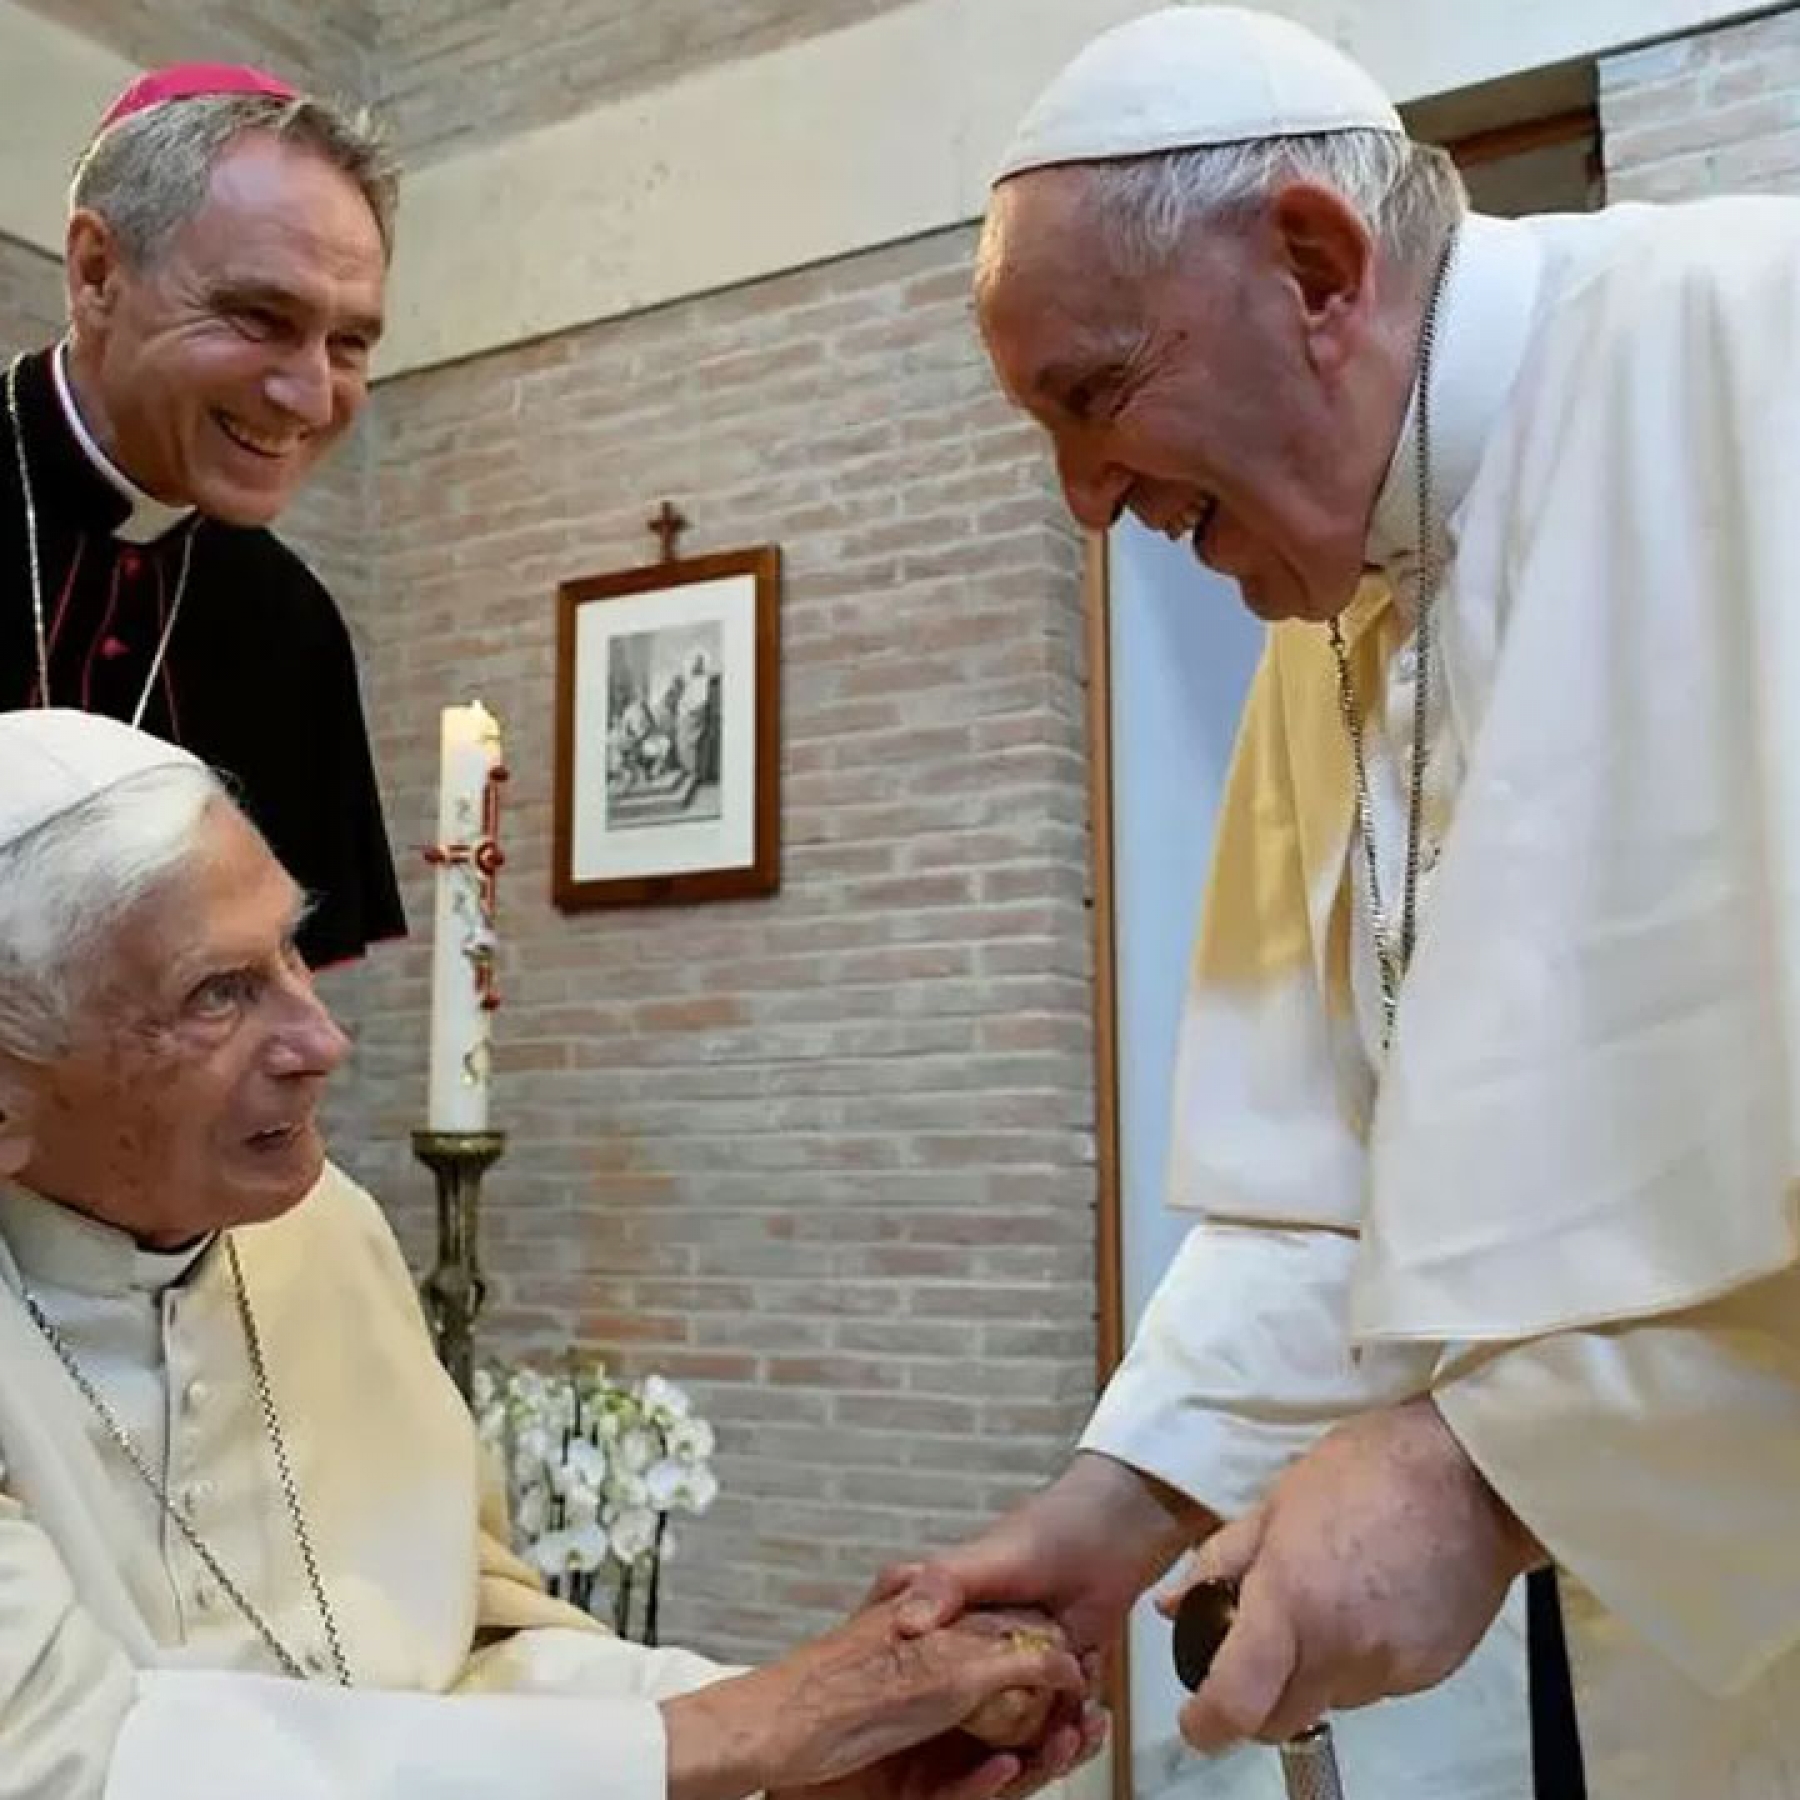 This is believed to be the most recent photograph of Benedict, here meeting Pope Francis at the monastery in August